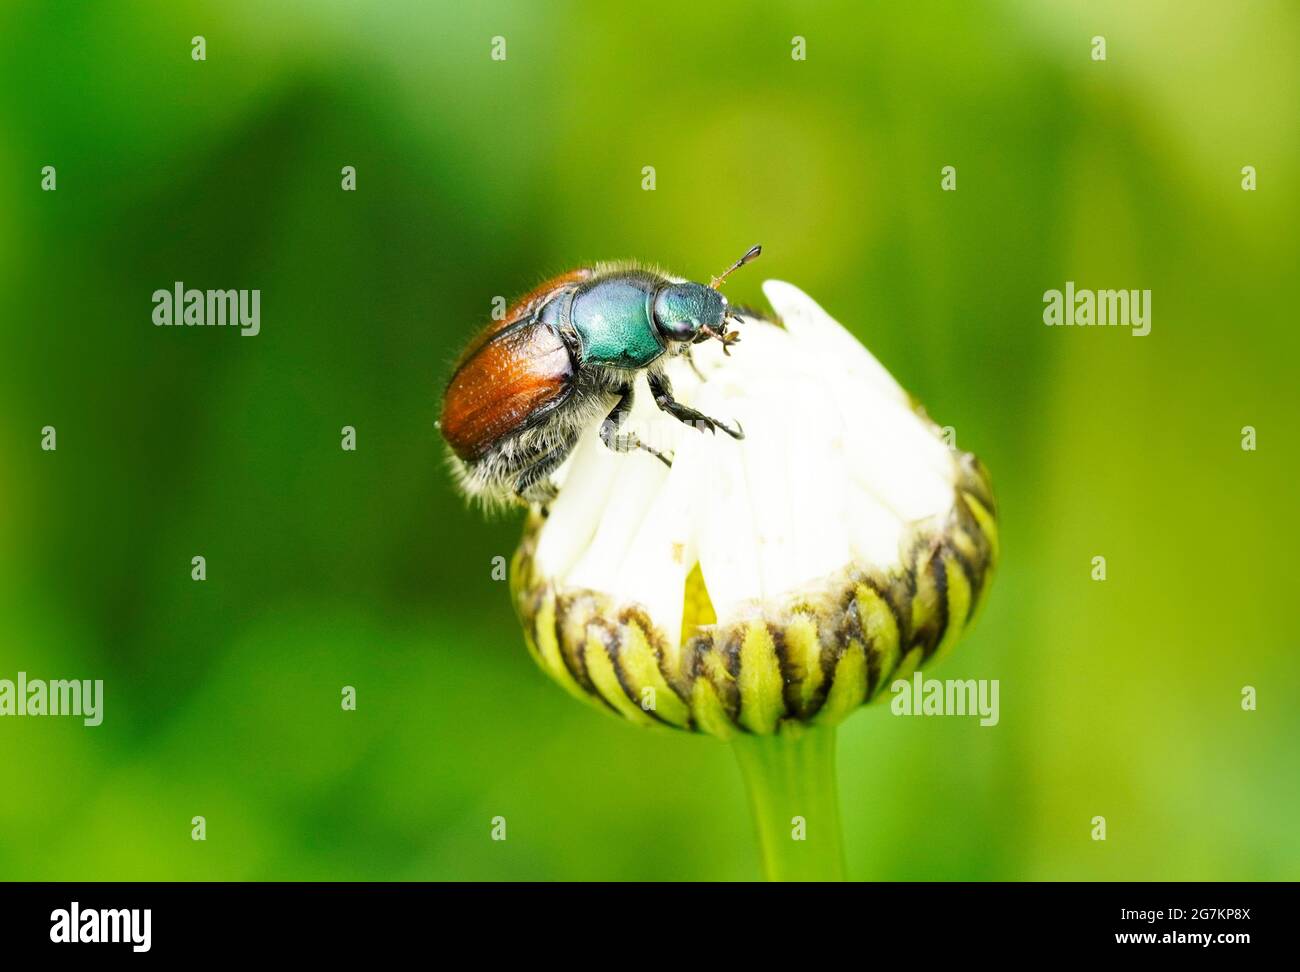 Garden chafer with a green-brown back. Phyllopertha horticola. Insect close up. Beetle of the scarab beetle family. Scarabaeidae Stock Photo